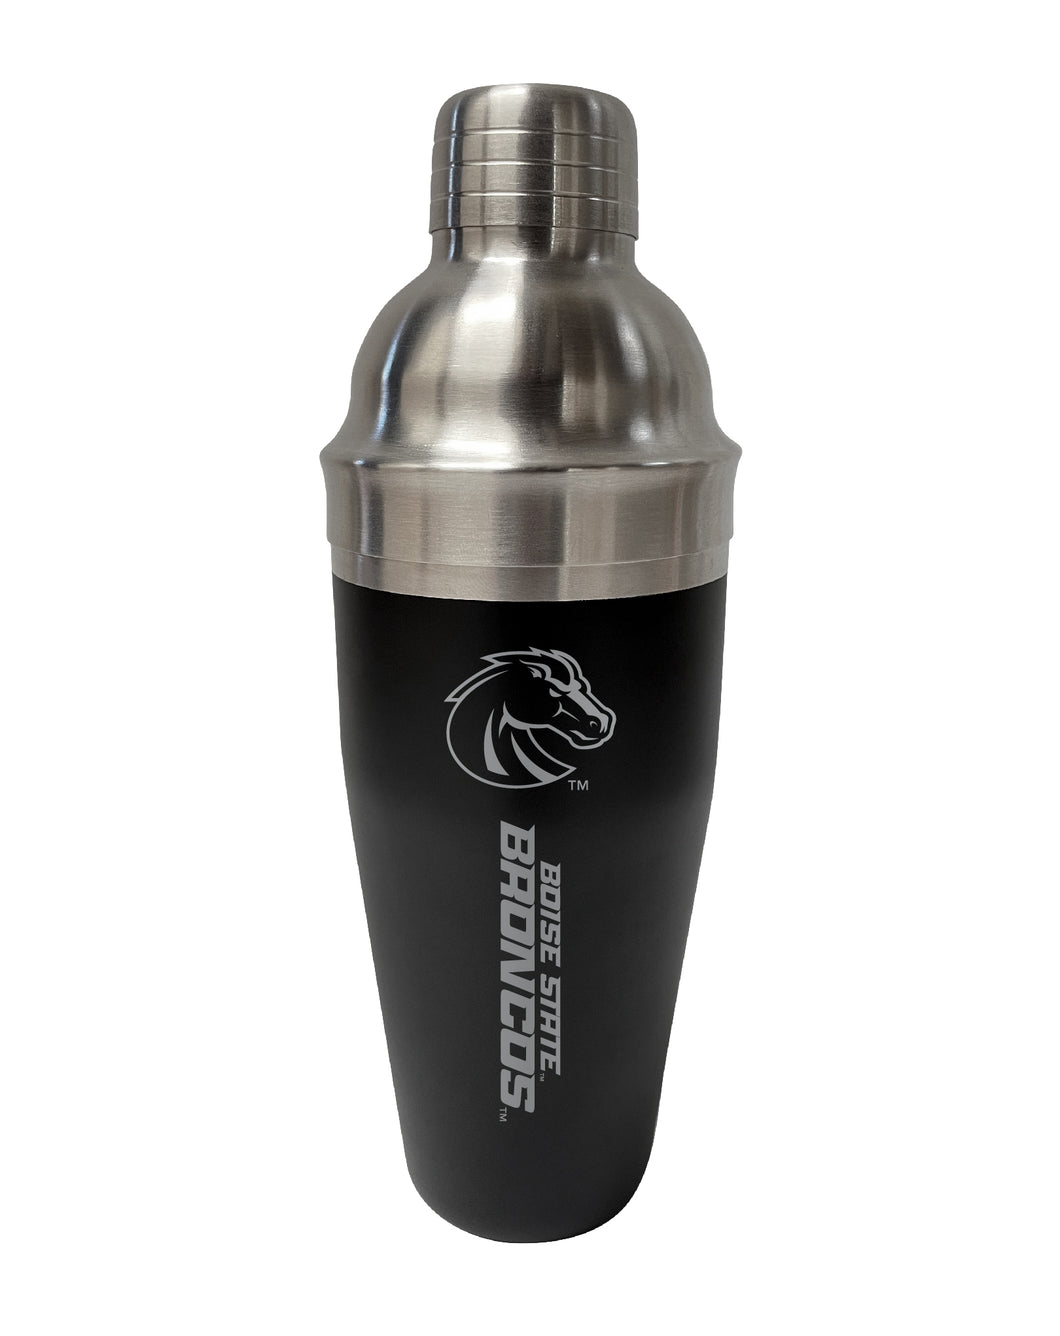 Boise State Broncos NCAA Official 24 oz Engraved Stainless Steel Cocktail Shaker | College Team Spirit Drink Mixer